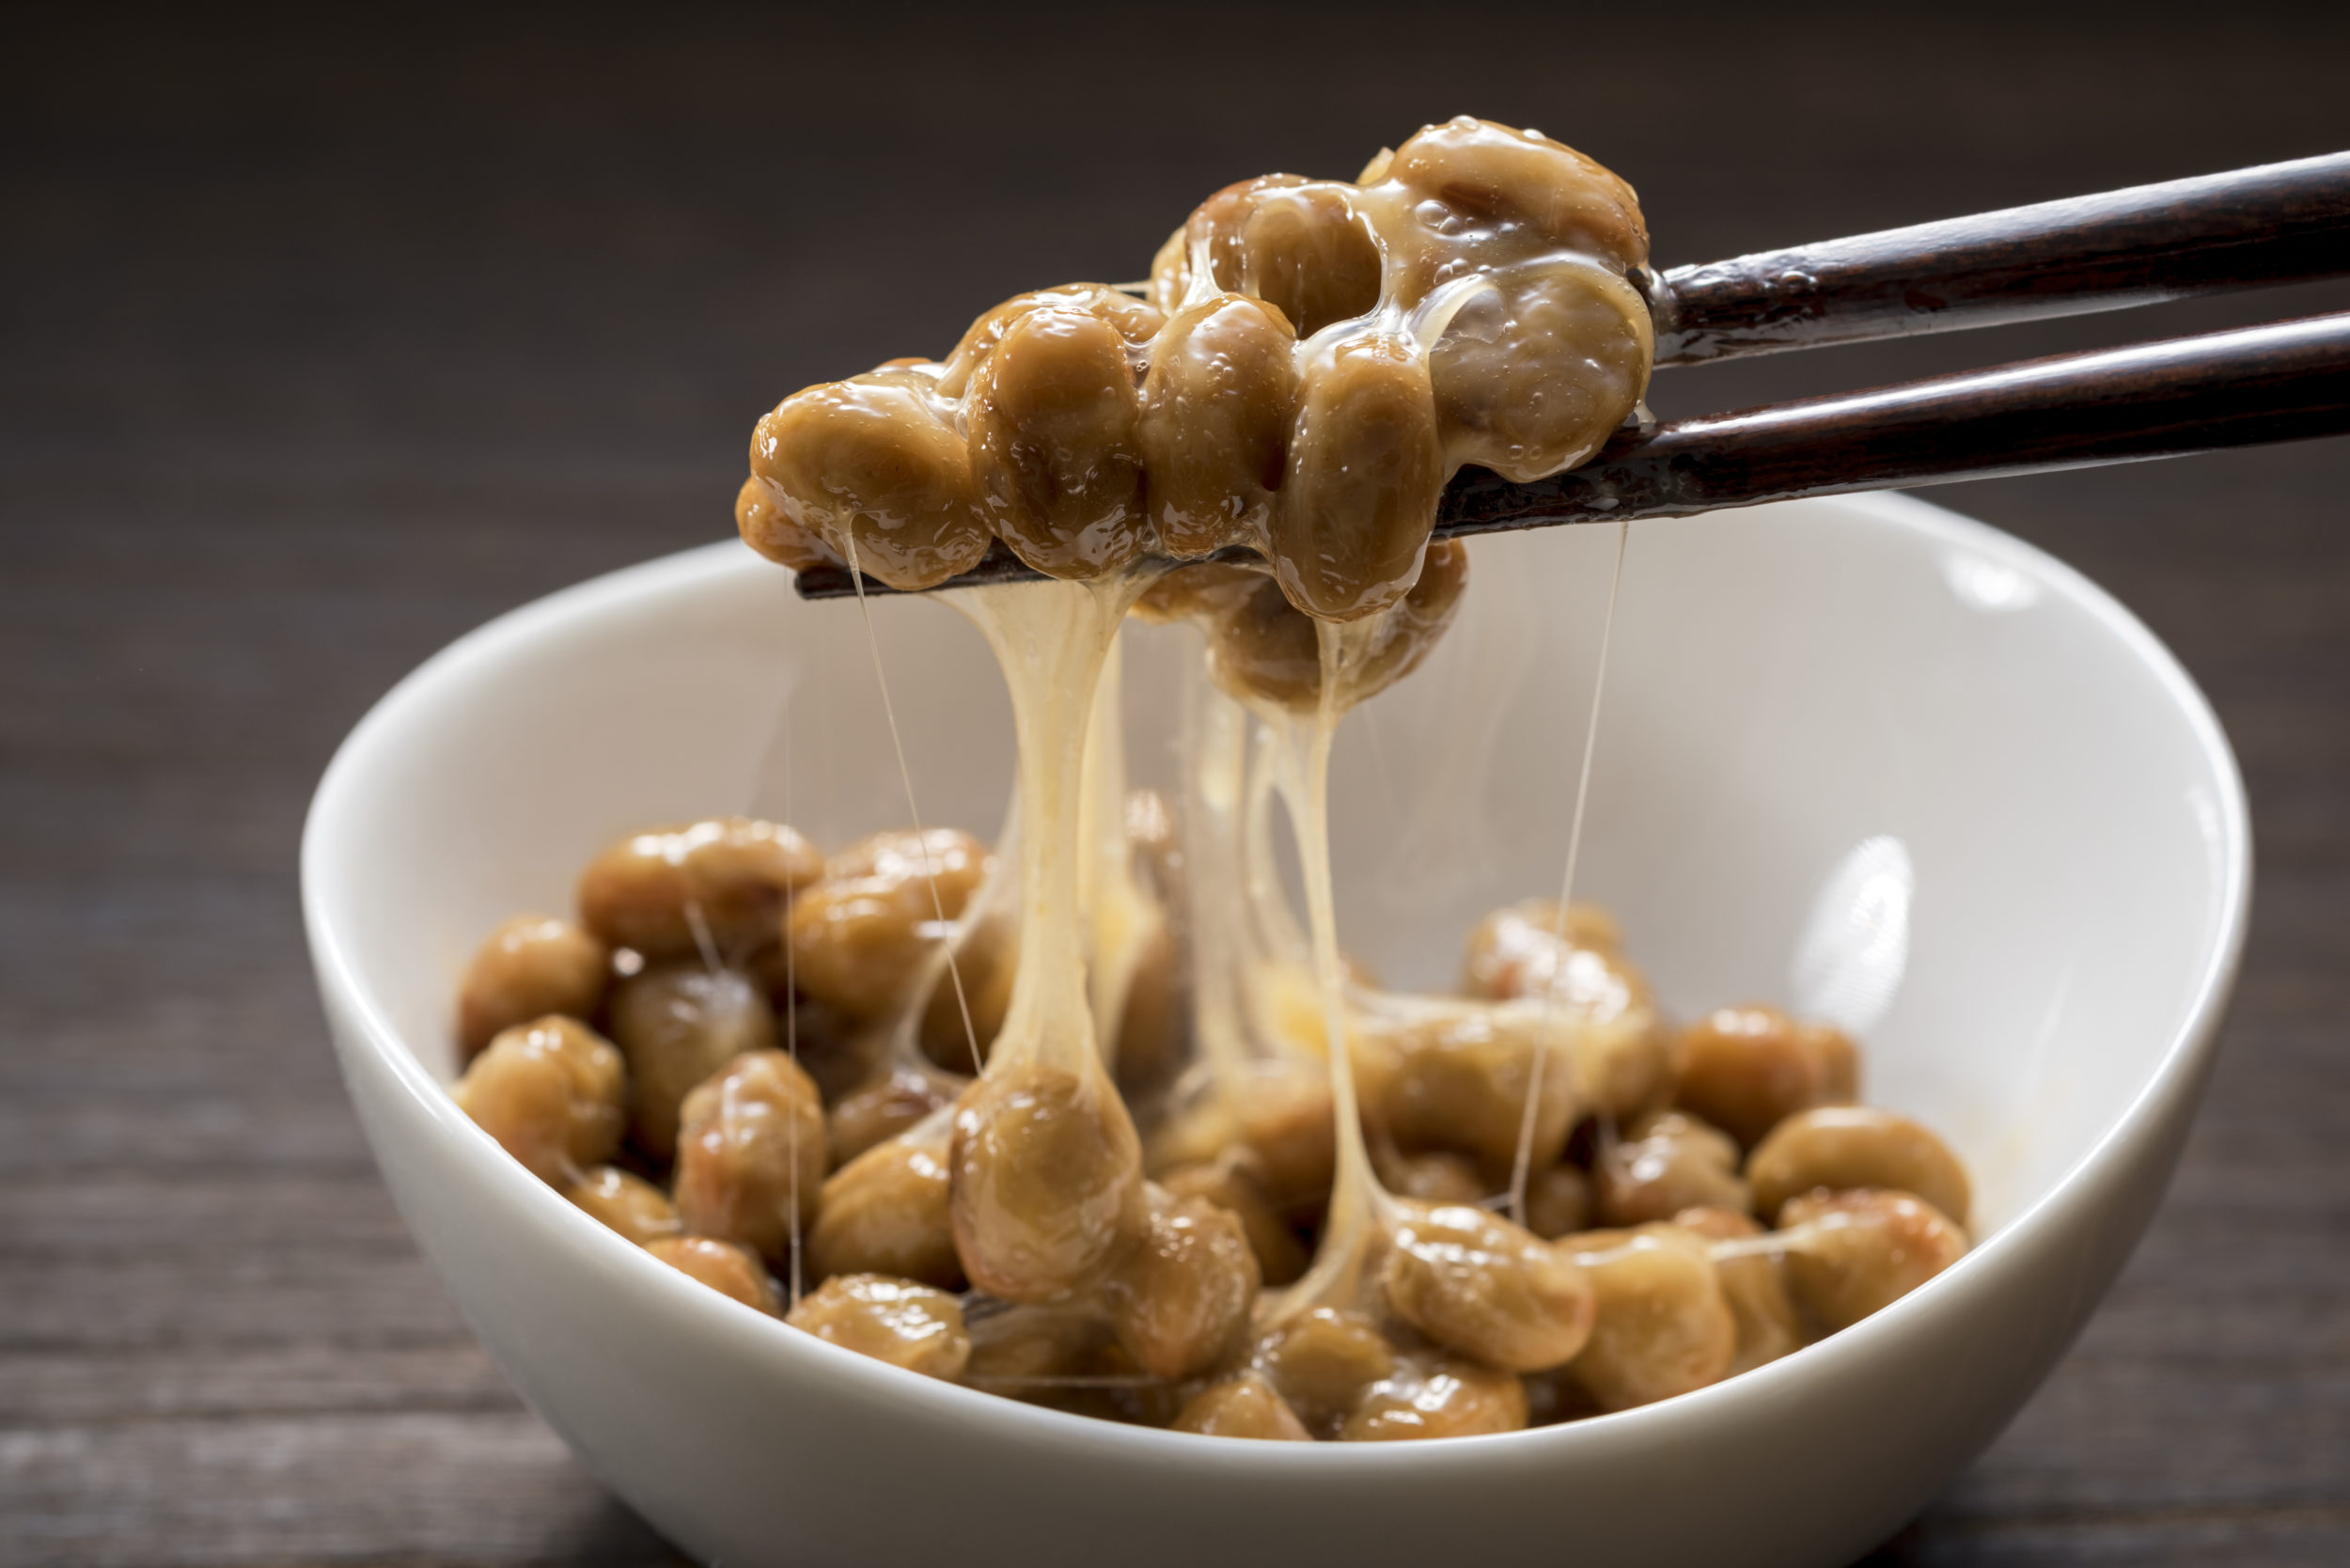 Natto industry members meet for annual Natto Summit - Specialty ...